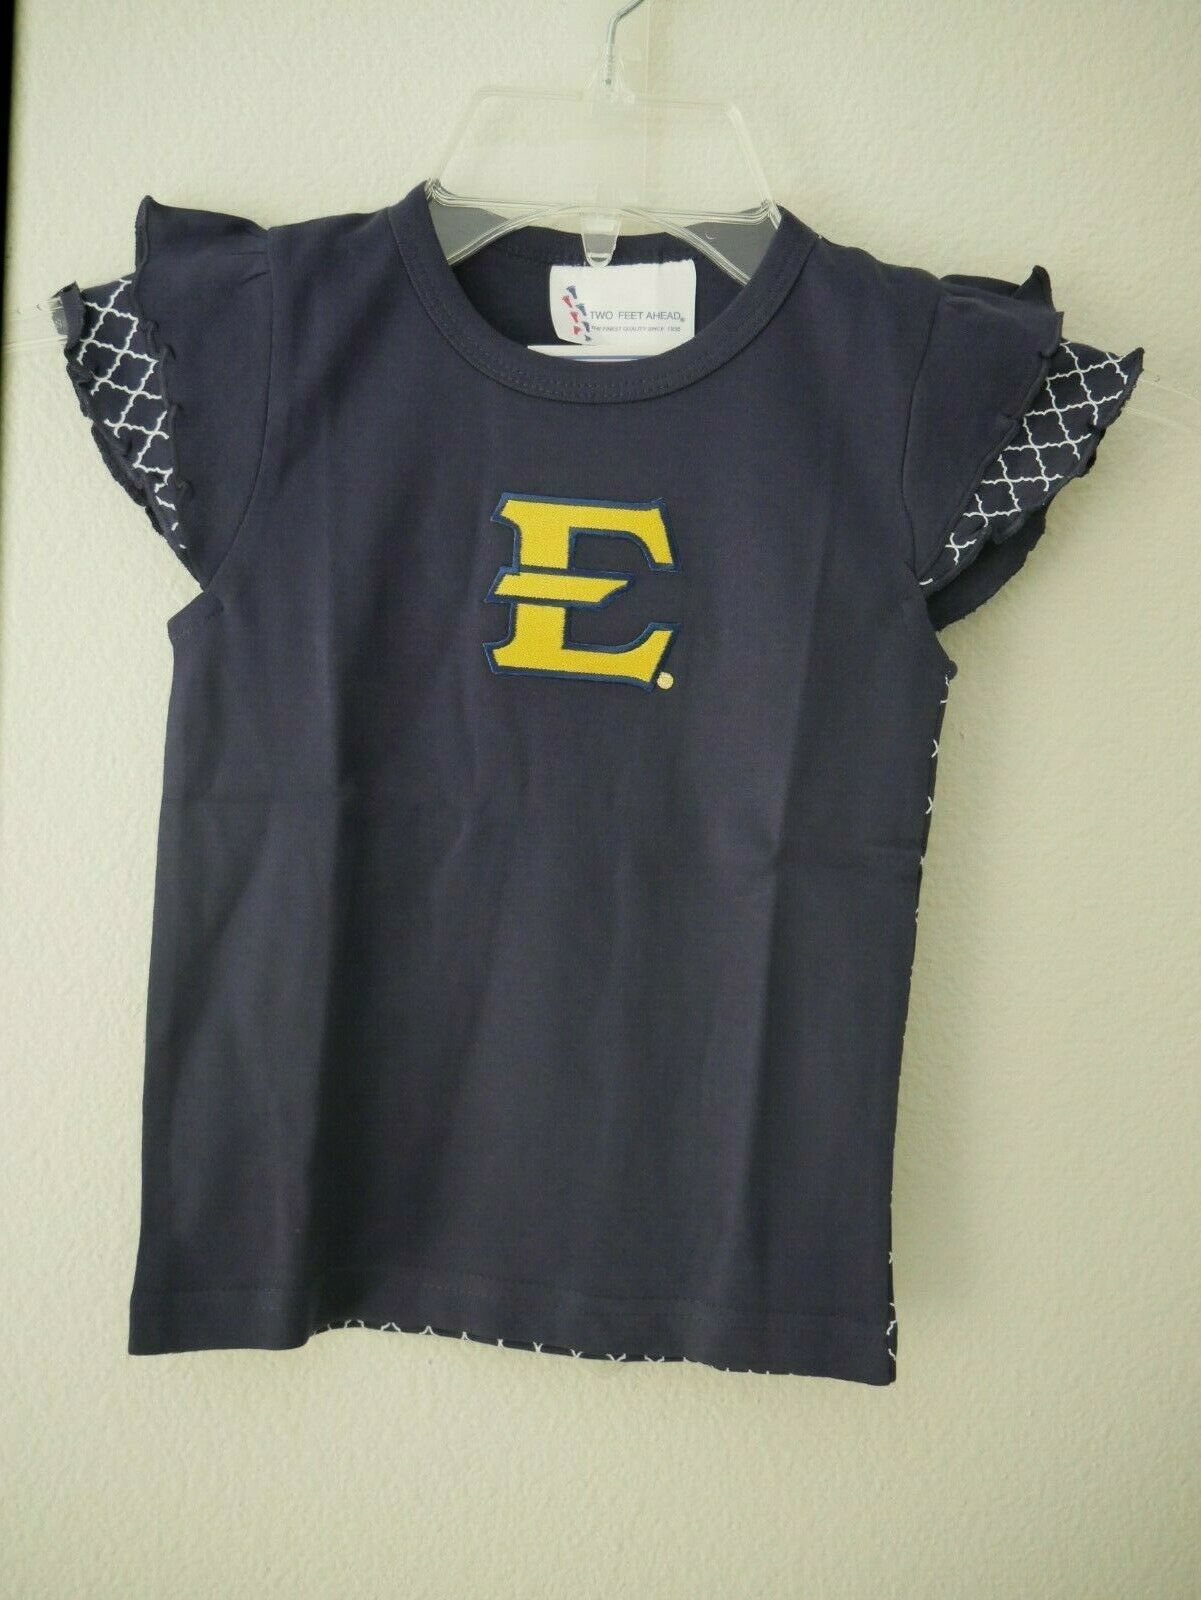 Primary image for Two Feet Ahead NCAA East Tennessee State Buccaneers Girls Shirt & Legging Set 2T